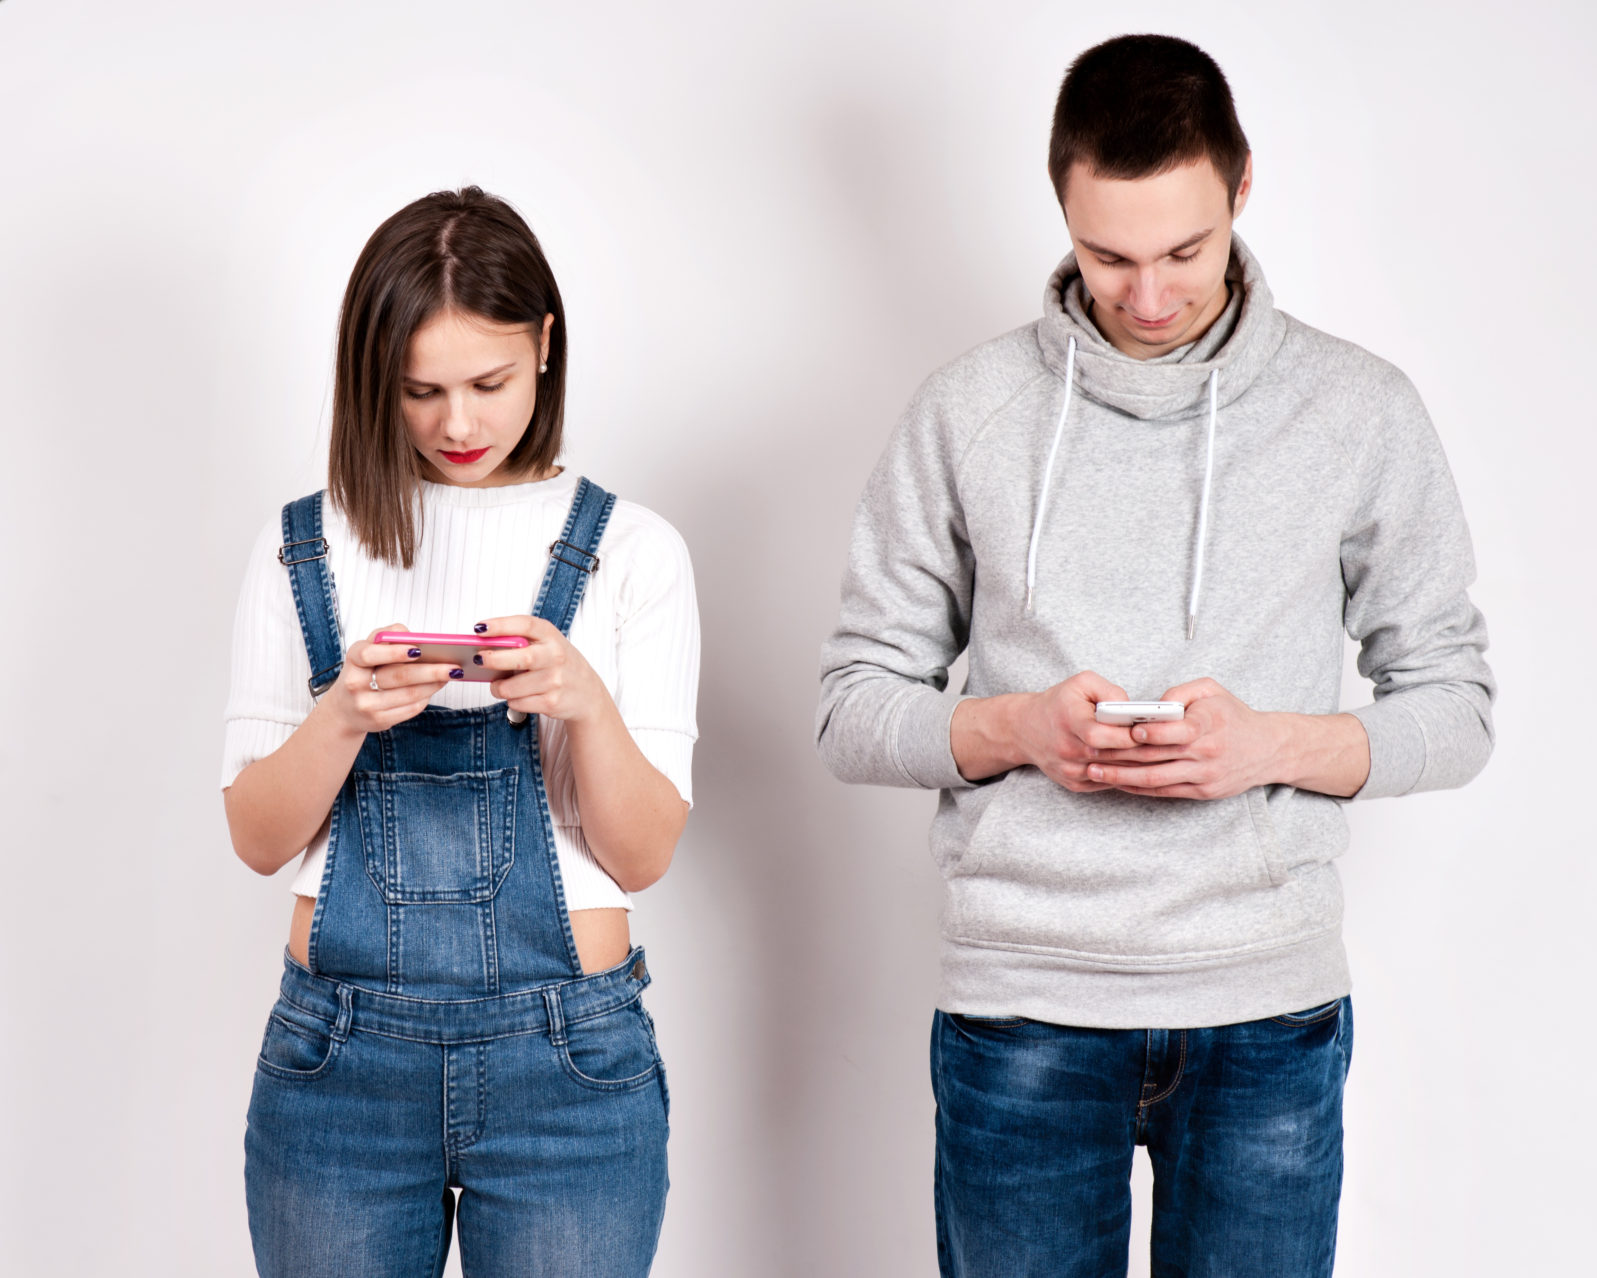 Divided young couple busy with their smartphones each